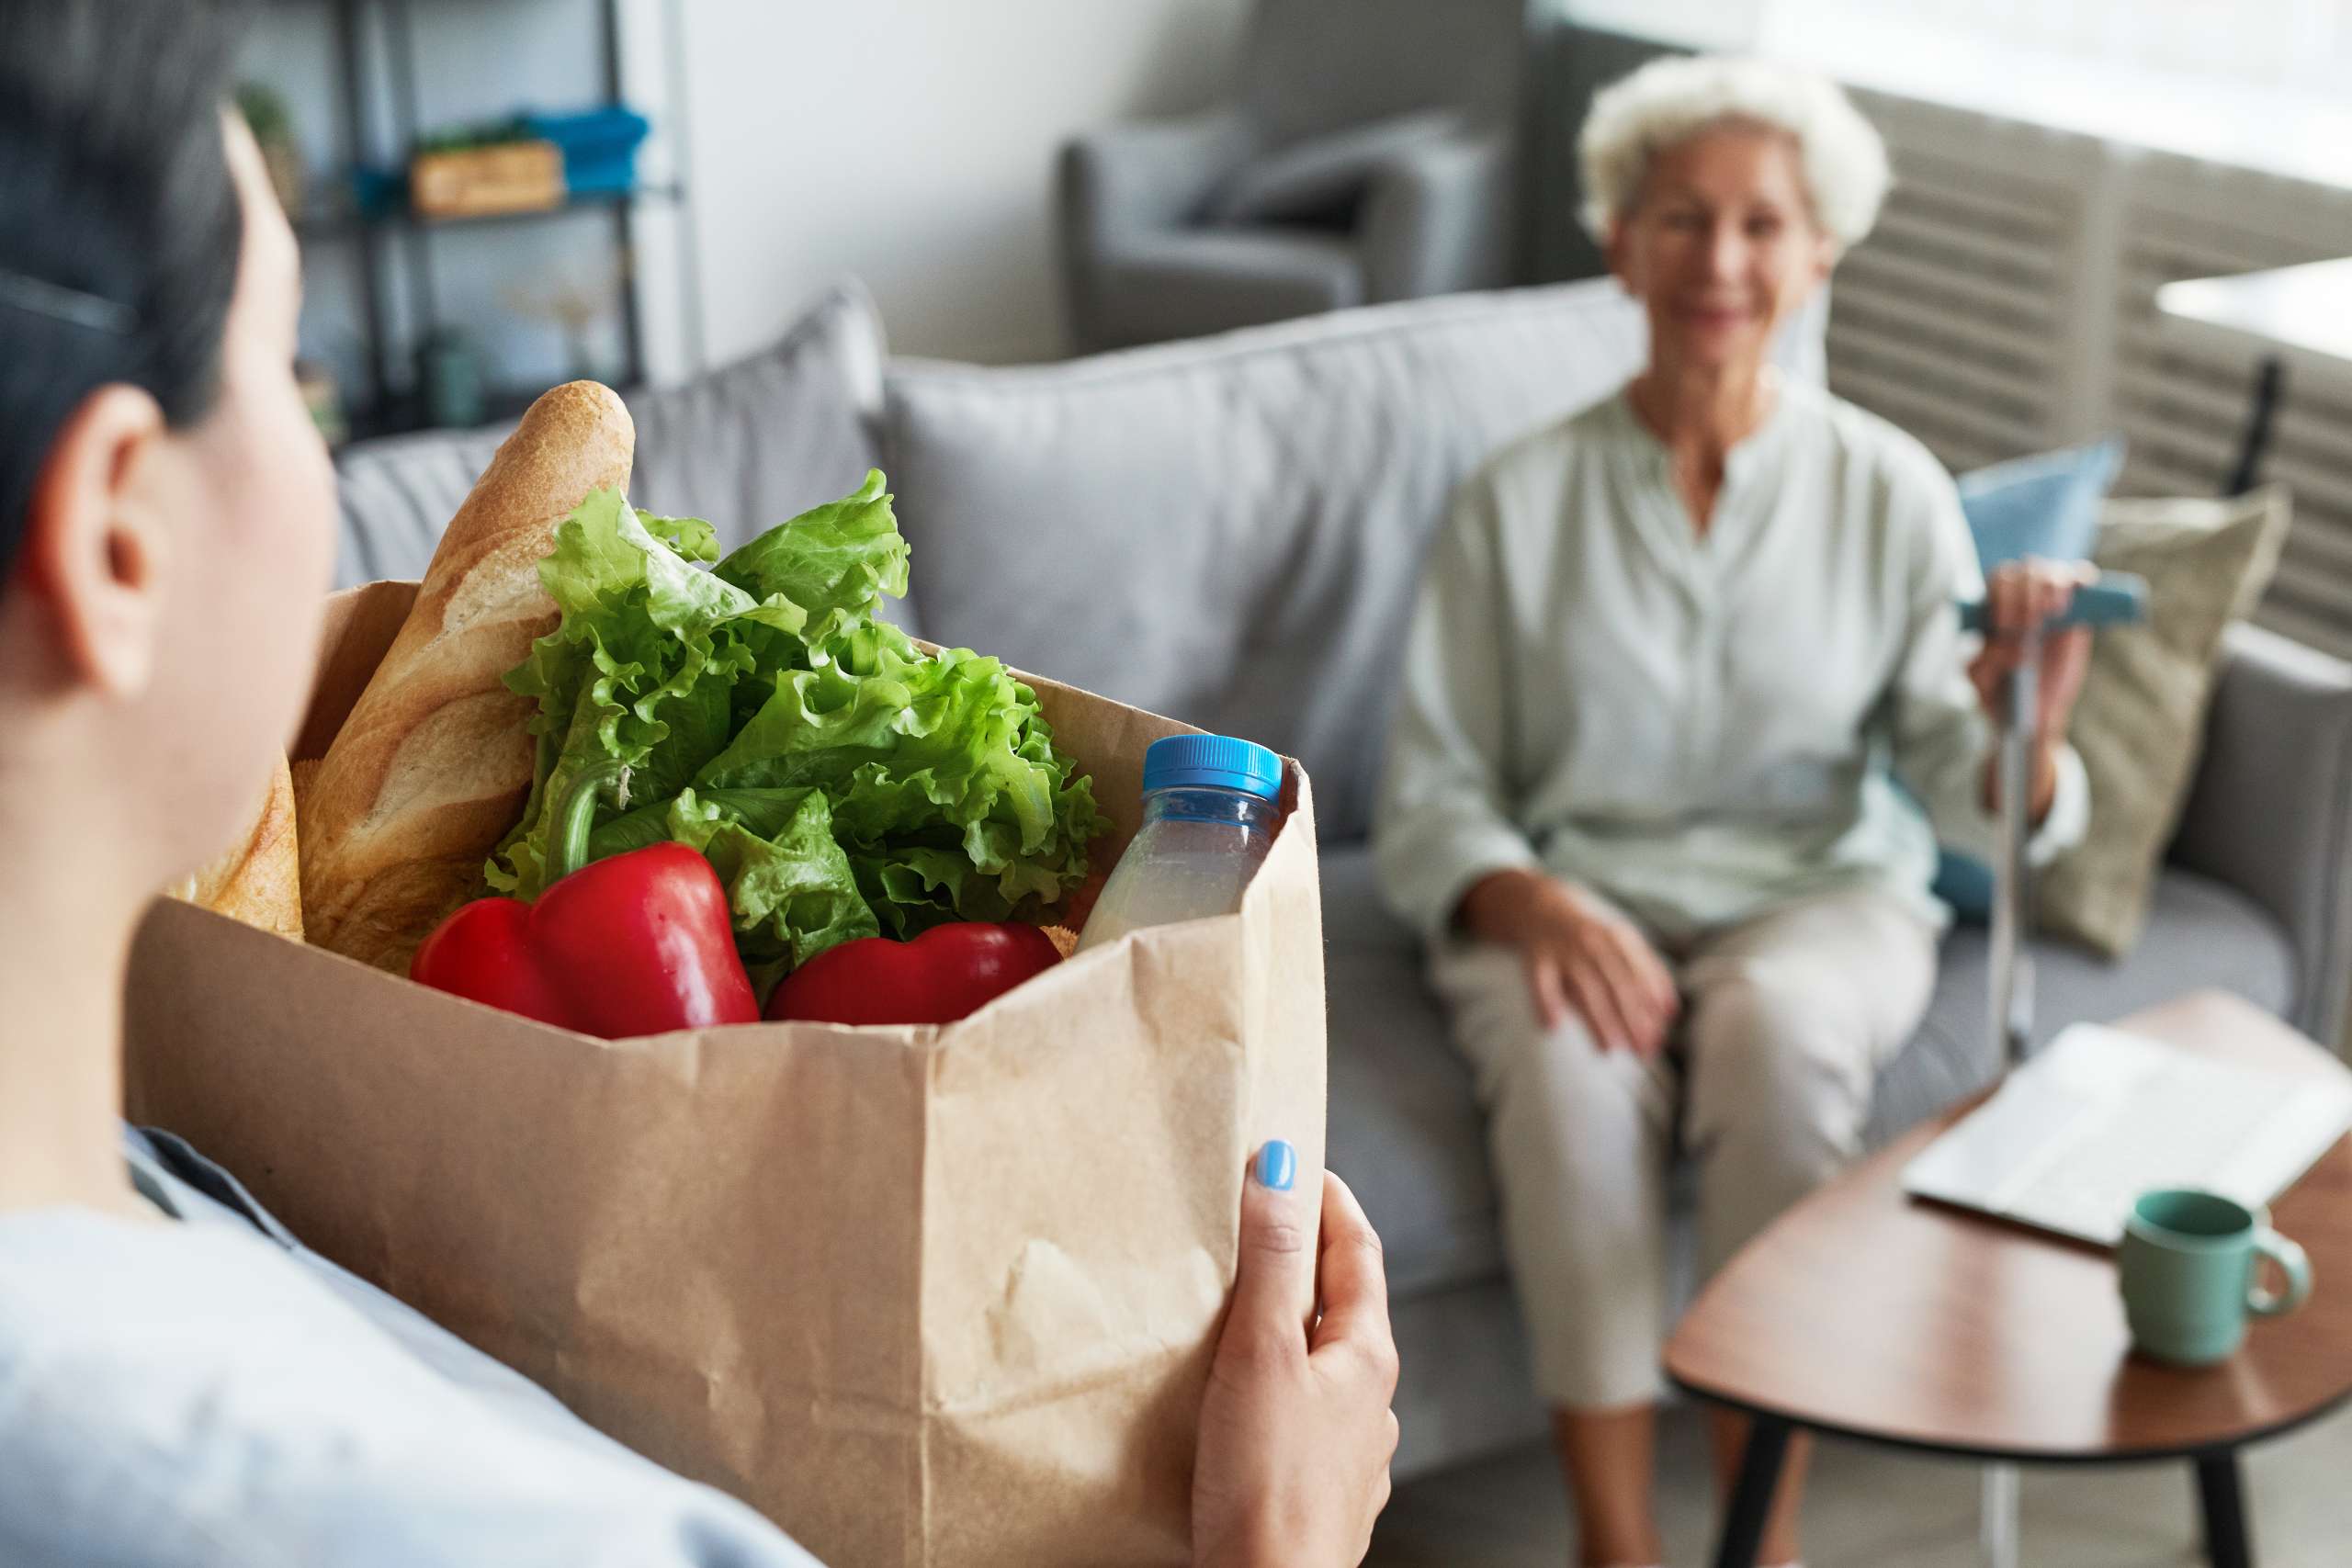 A caregiver delivering groceries to senior woman